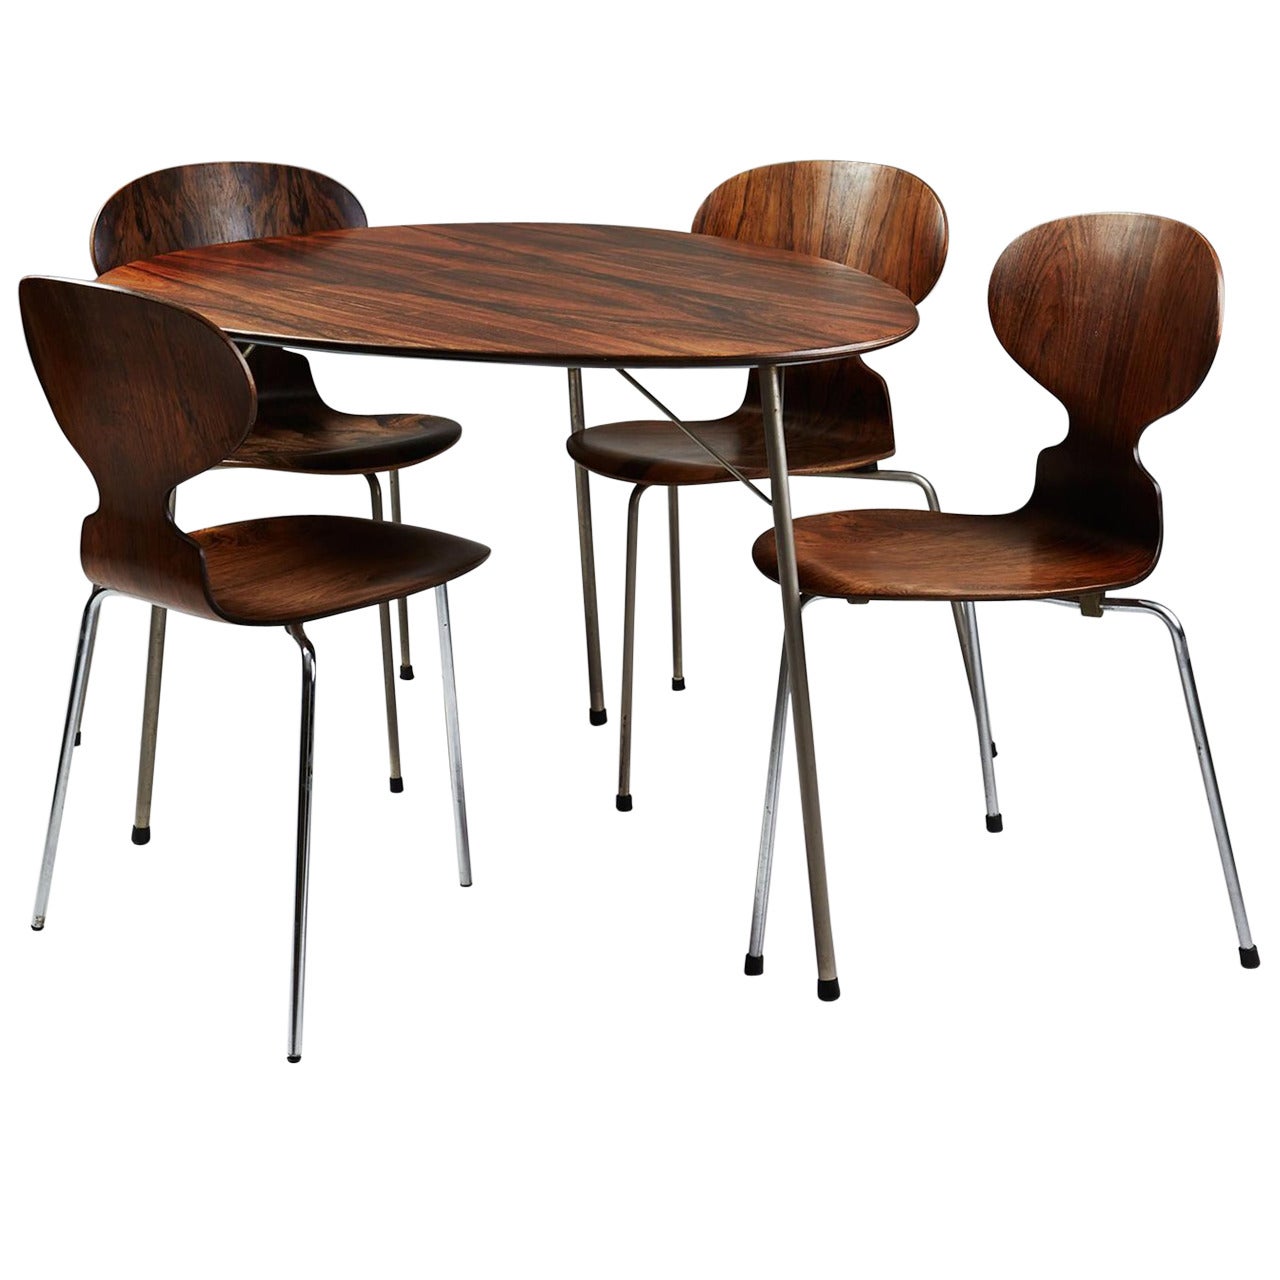 Dining Table and Chairs Designed by Arne Jacobsen for Fritz Hansen, Denmark